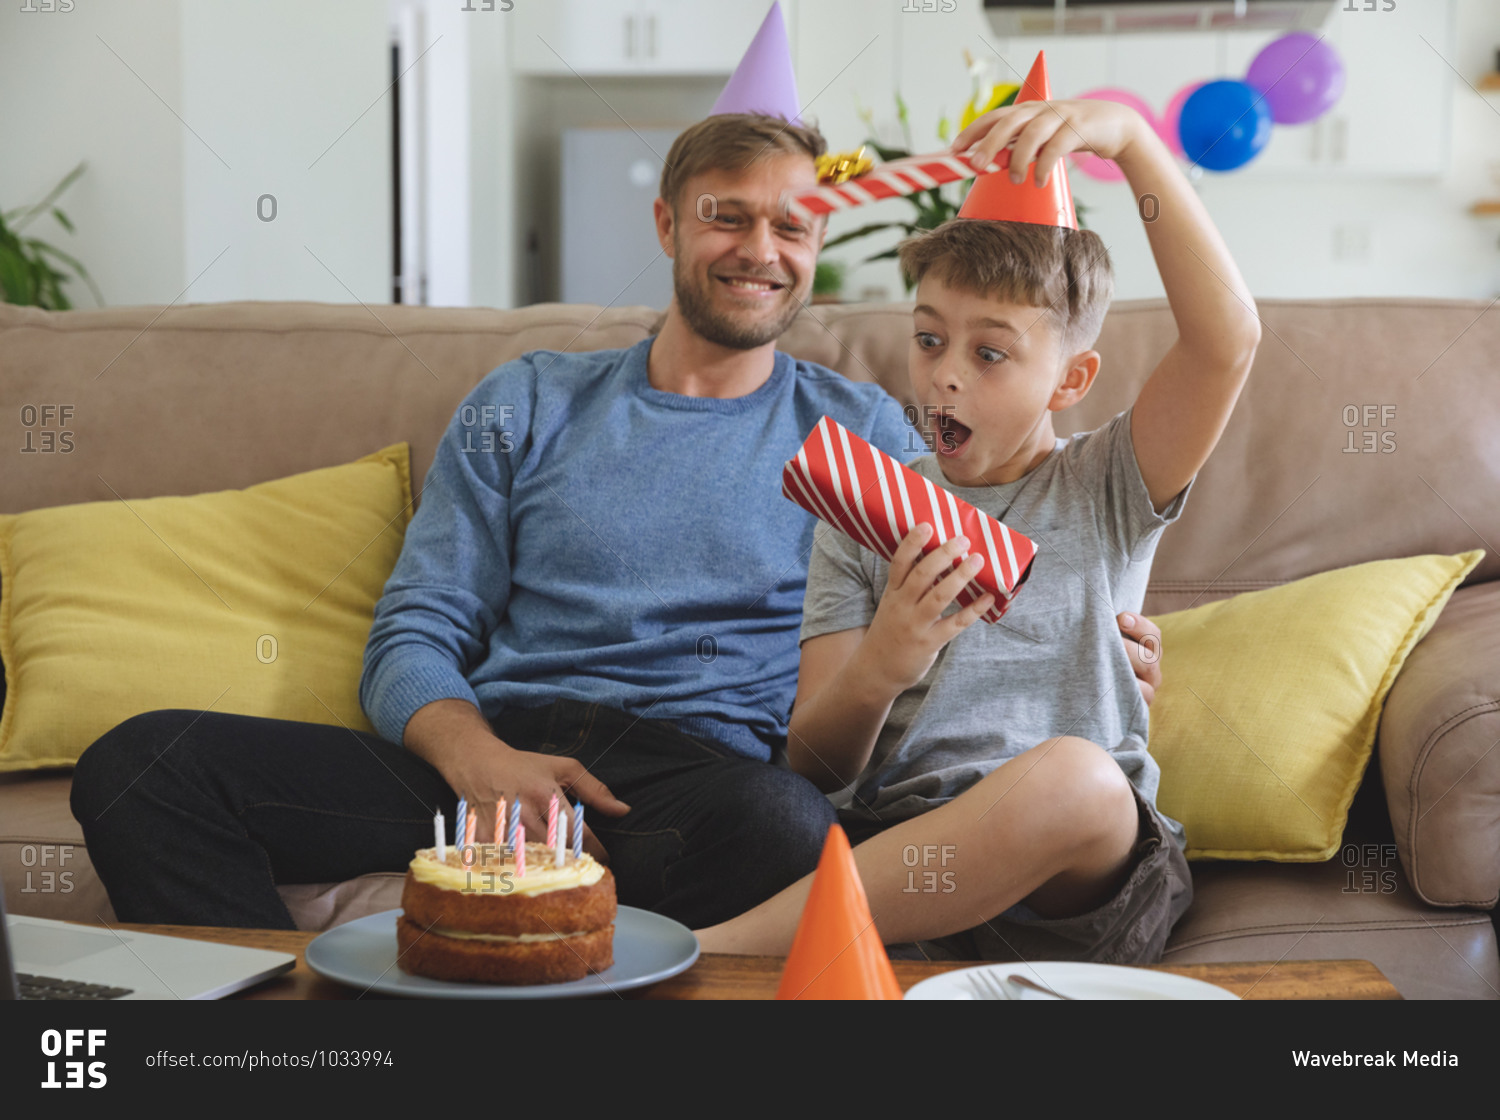 Caucasian man spending time at home with his son together, wearing party hats boy receiving birthday present. Social distancing during Covid 19 Coronavirus quarantine lockdown.